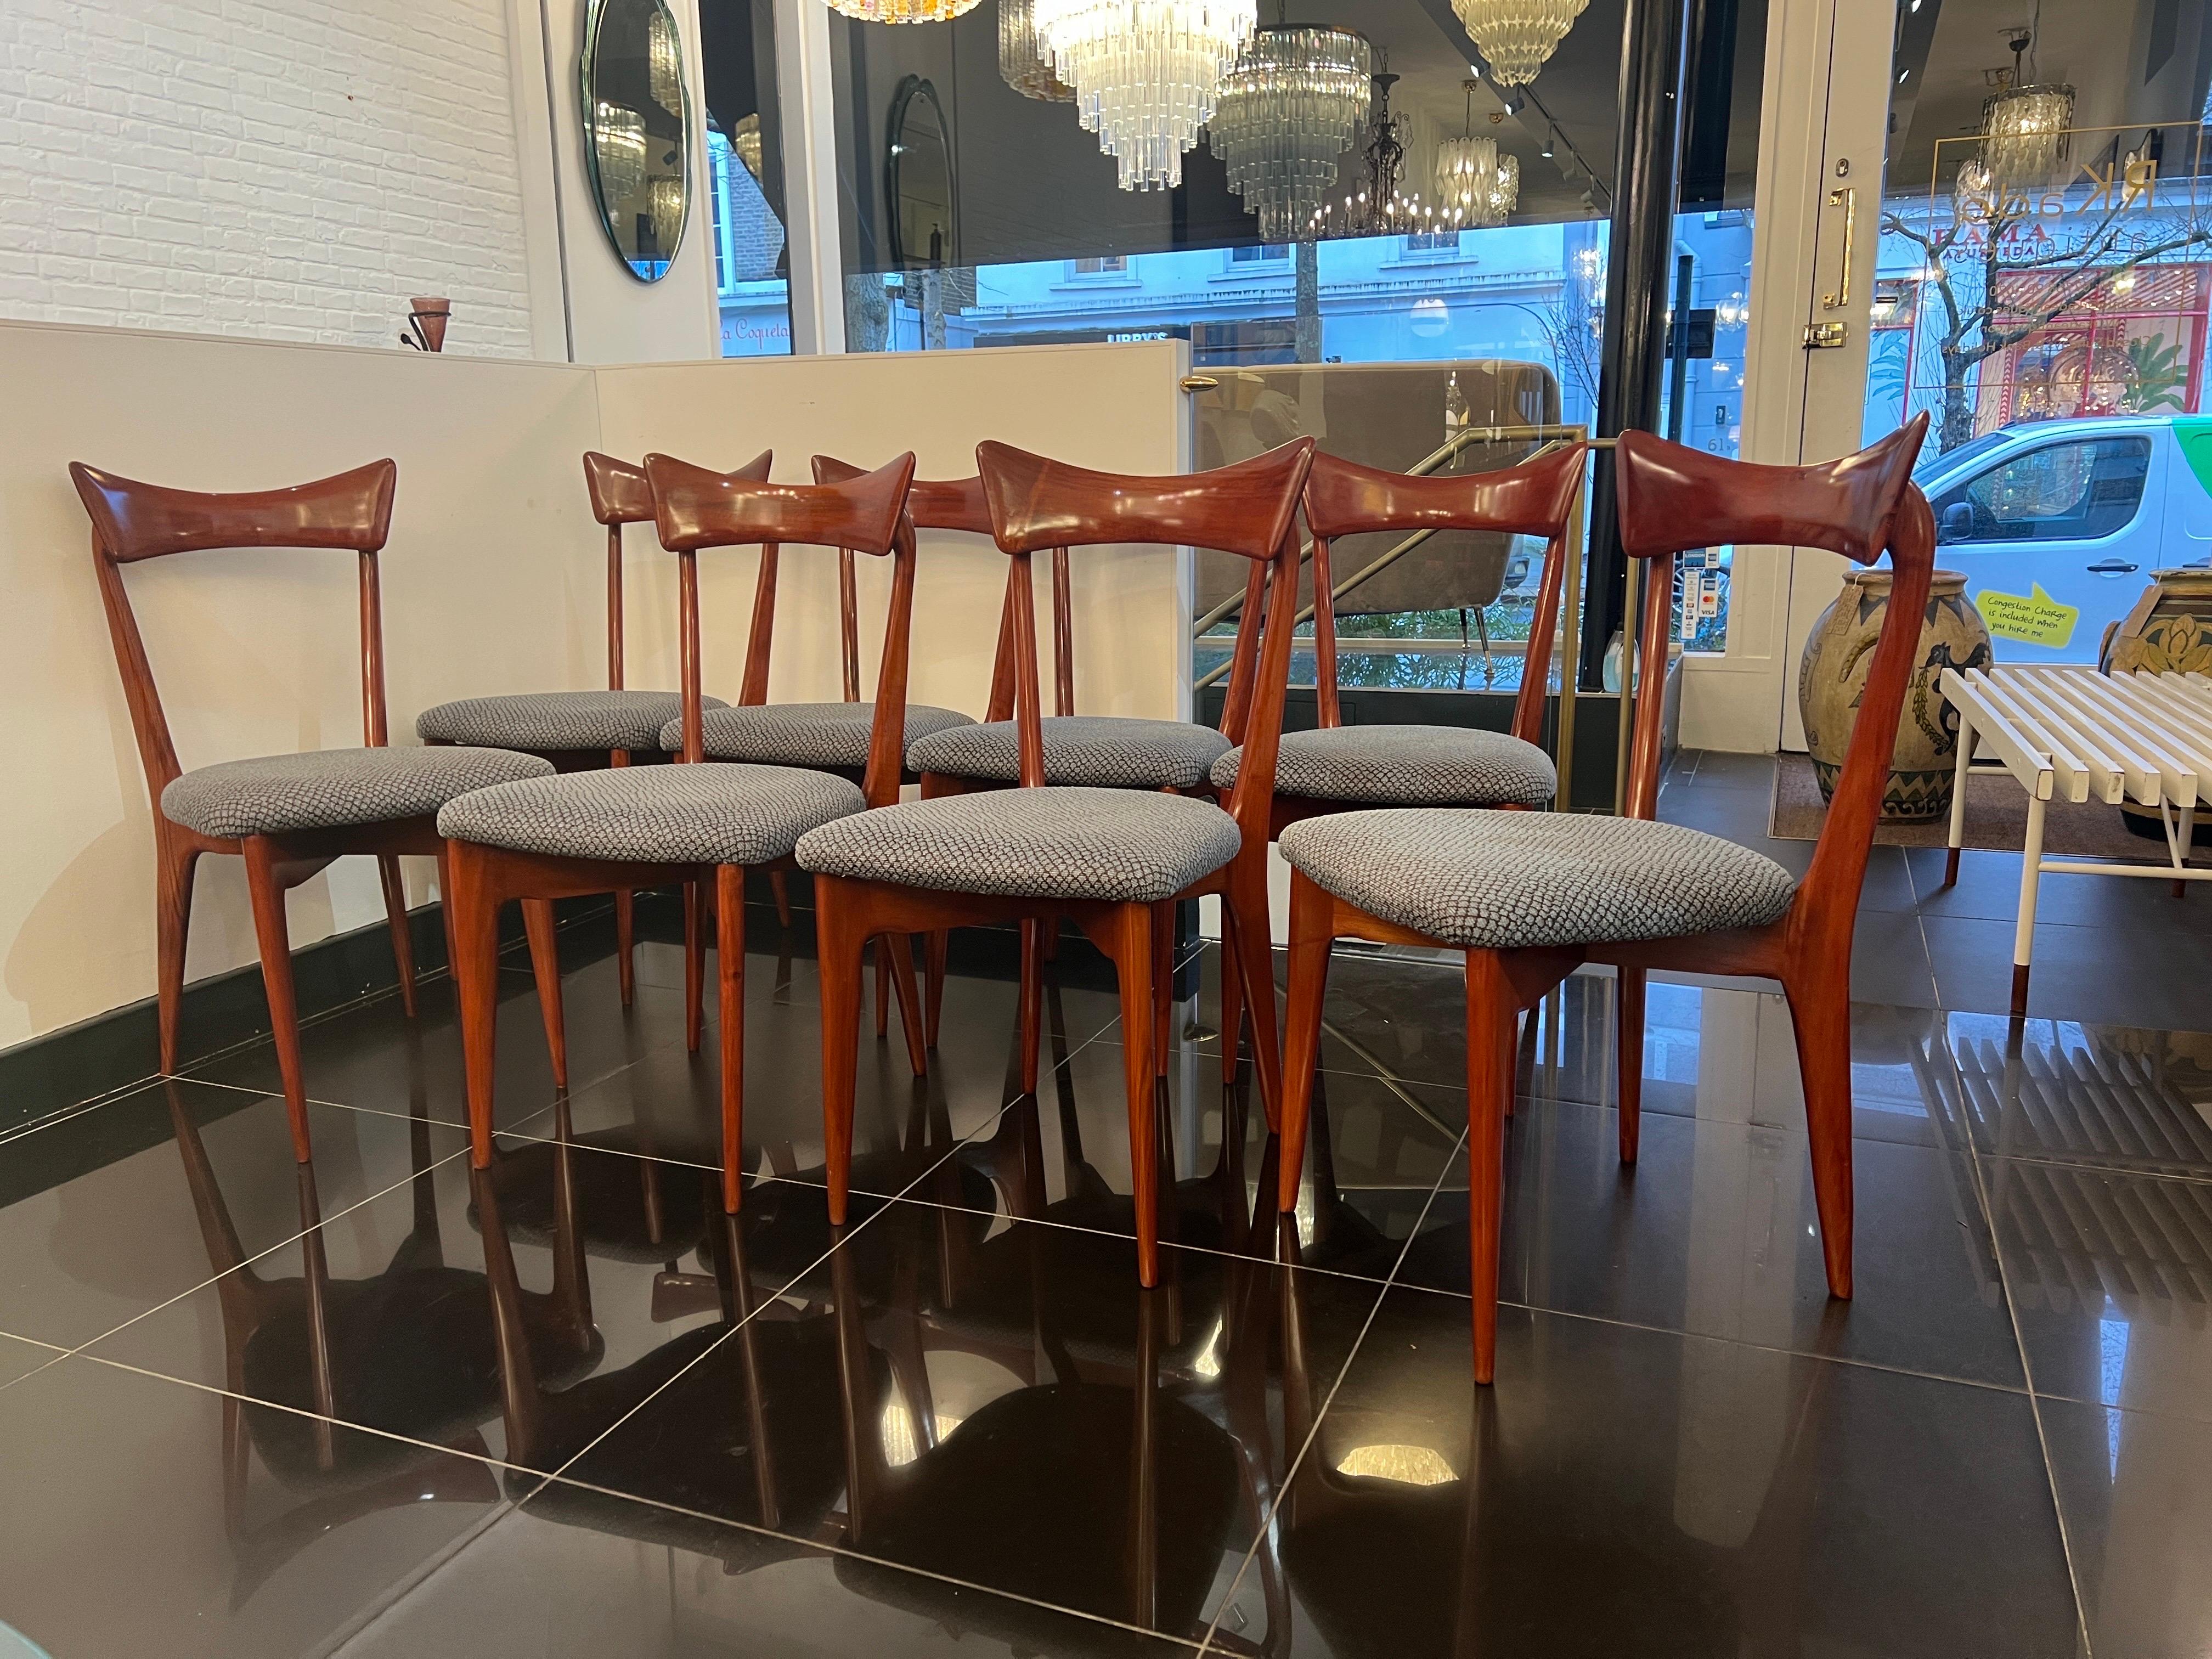 This wonderful set of 8 rare cherrywood dining chairs by Ico & Luisa Parisi for Ariberto Colombo, Cantù . Sculptural  frame with a curved papillon shaped backrest. The seats are newly upholstered in fine blue grey mosaic Jacquard fabric .